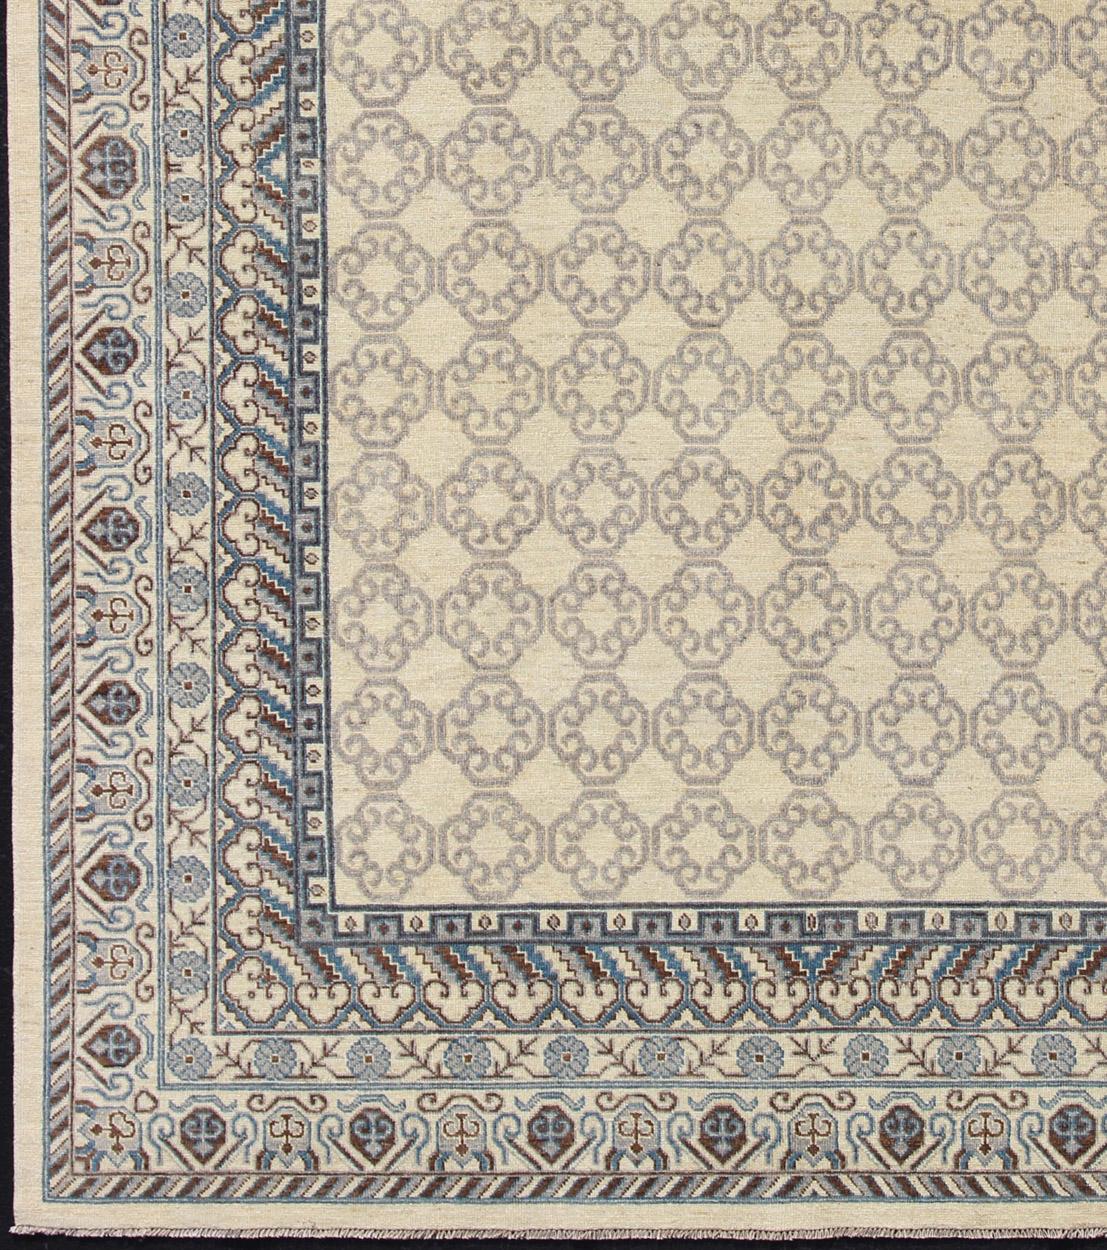 Made in Afghanistan, this rug is made with finest wool and all over tribal Khotan design in the border and the background. Keivan Woven Arts / Rug 1912-262, country of origin / type: Afghanistan / Khotan

Measures: 9'8 x 12'11.

This Khotan